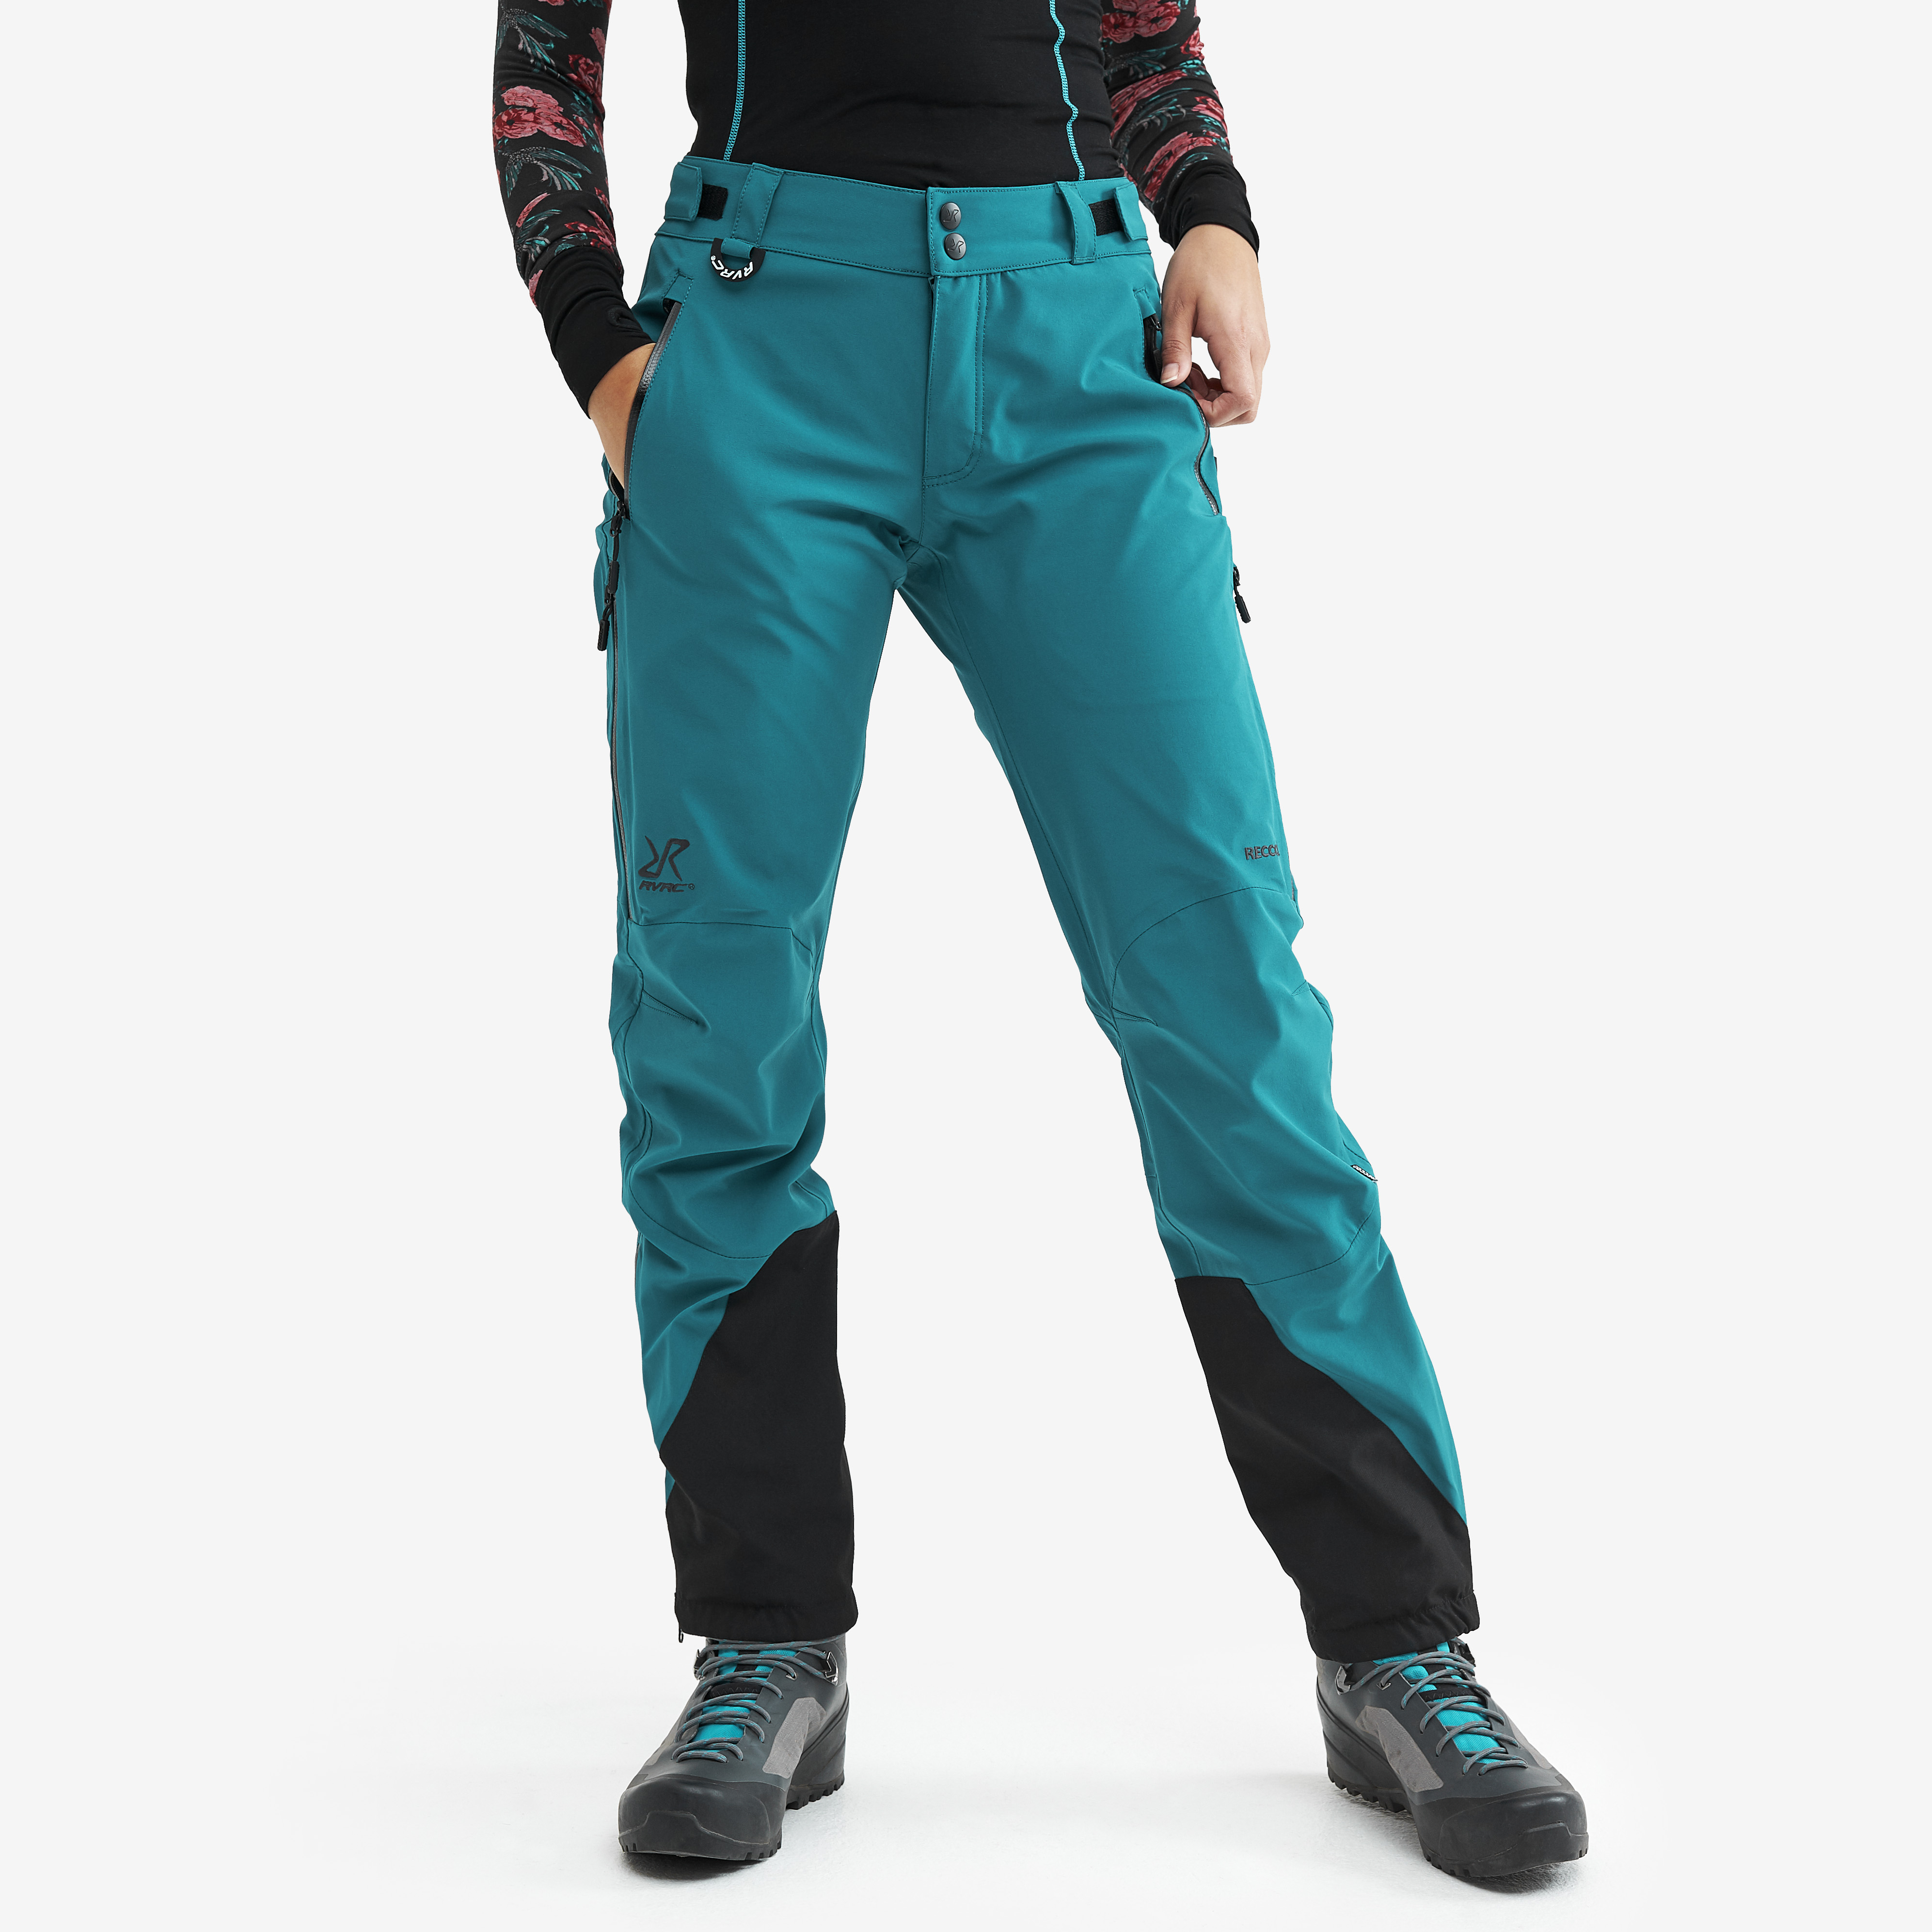 Cyclone Rescue Pants Dark Turquoise Mujeres